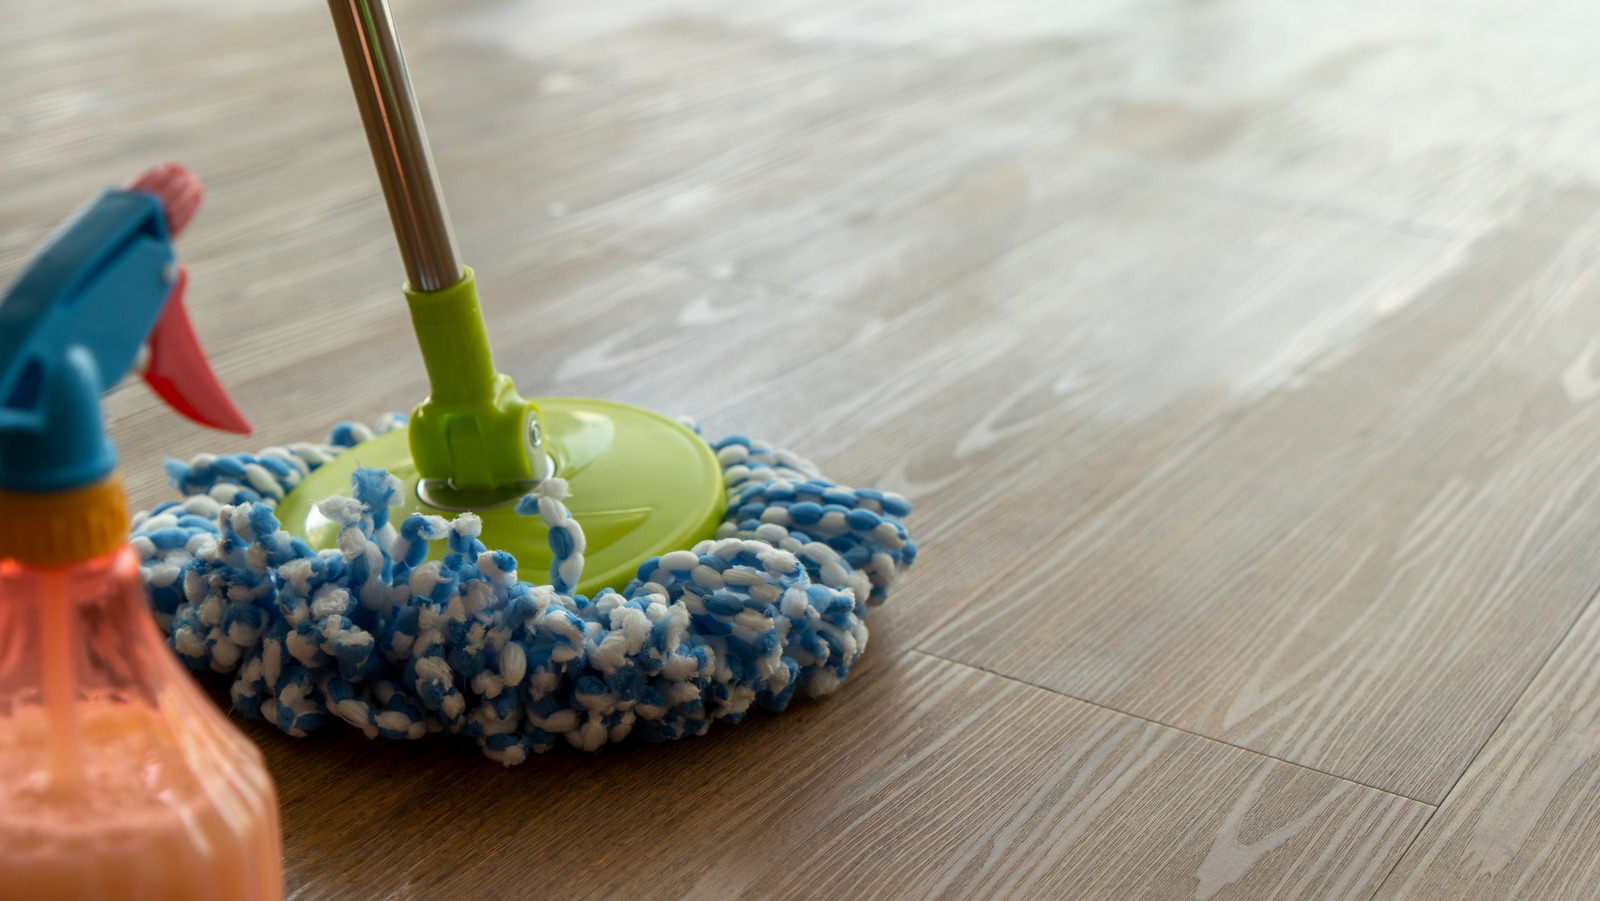 How to Clean & Care For Vinyl Plank Flooring Naturally